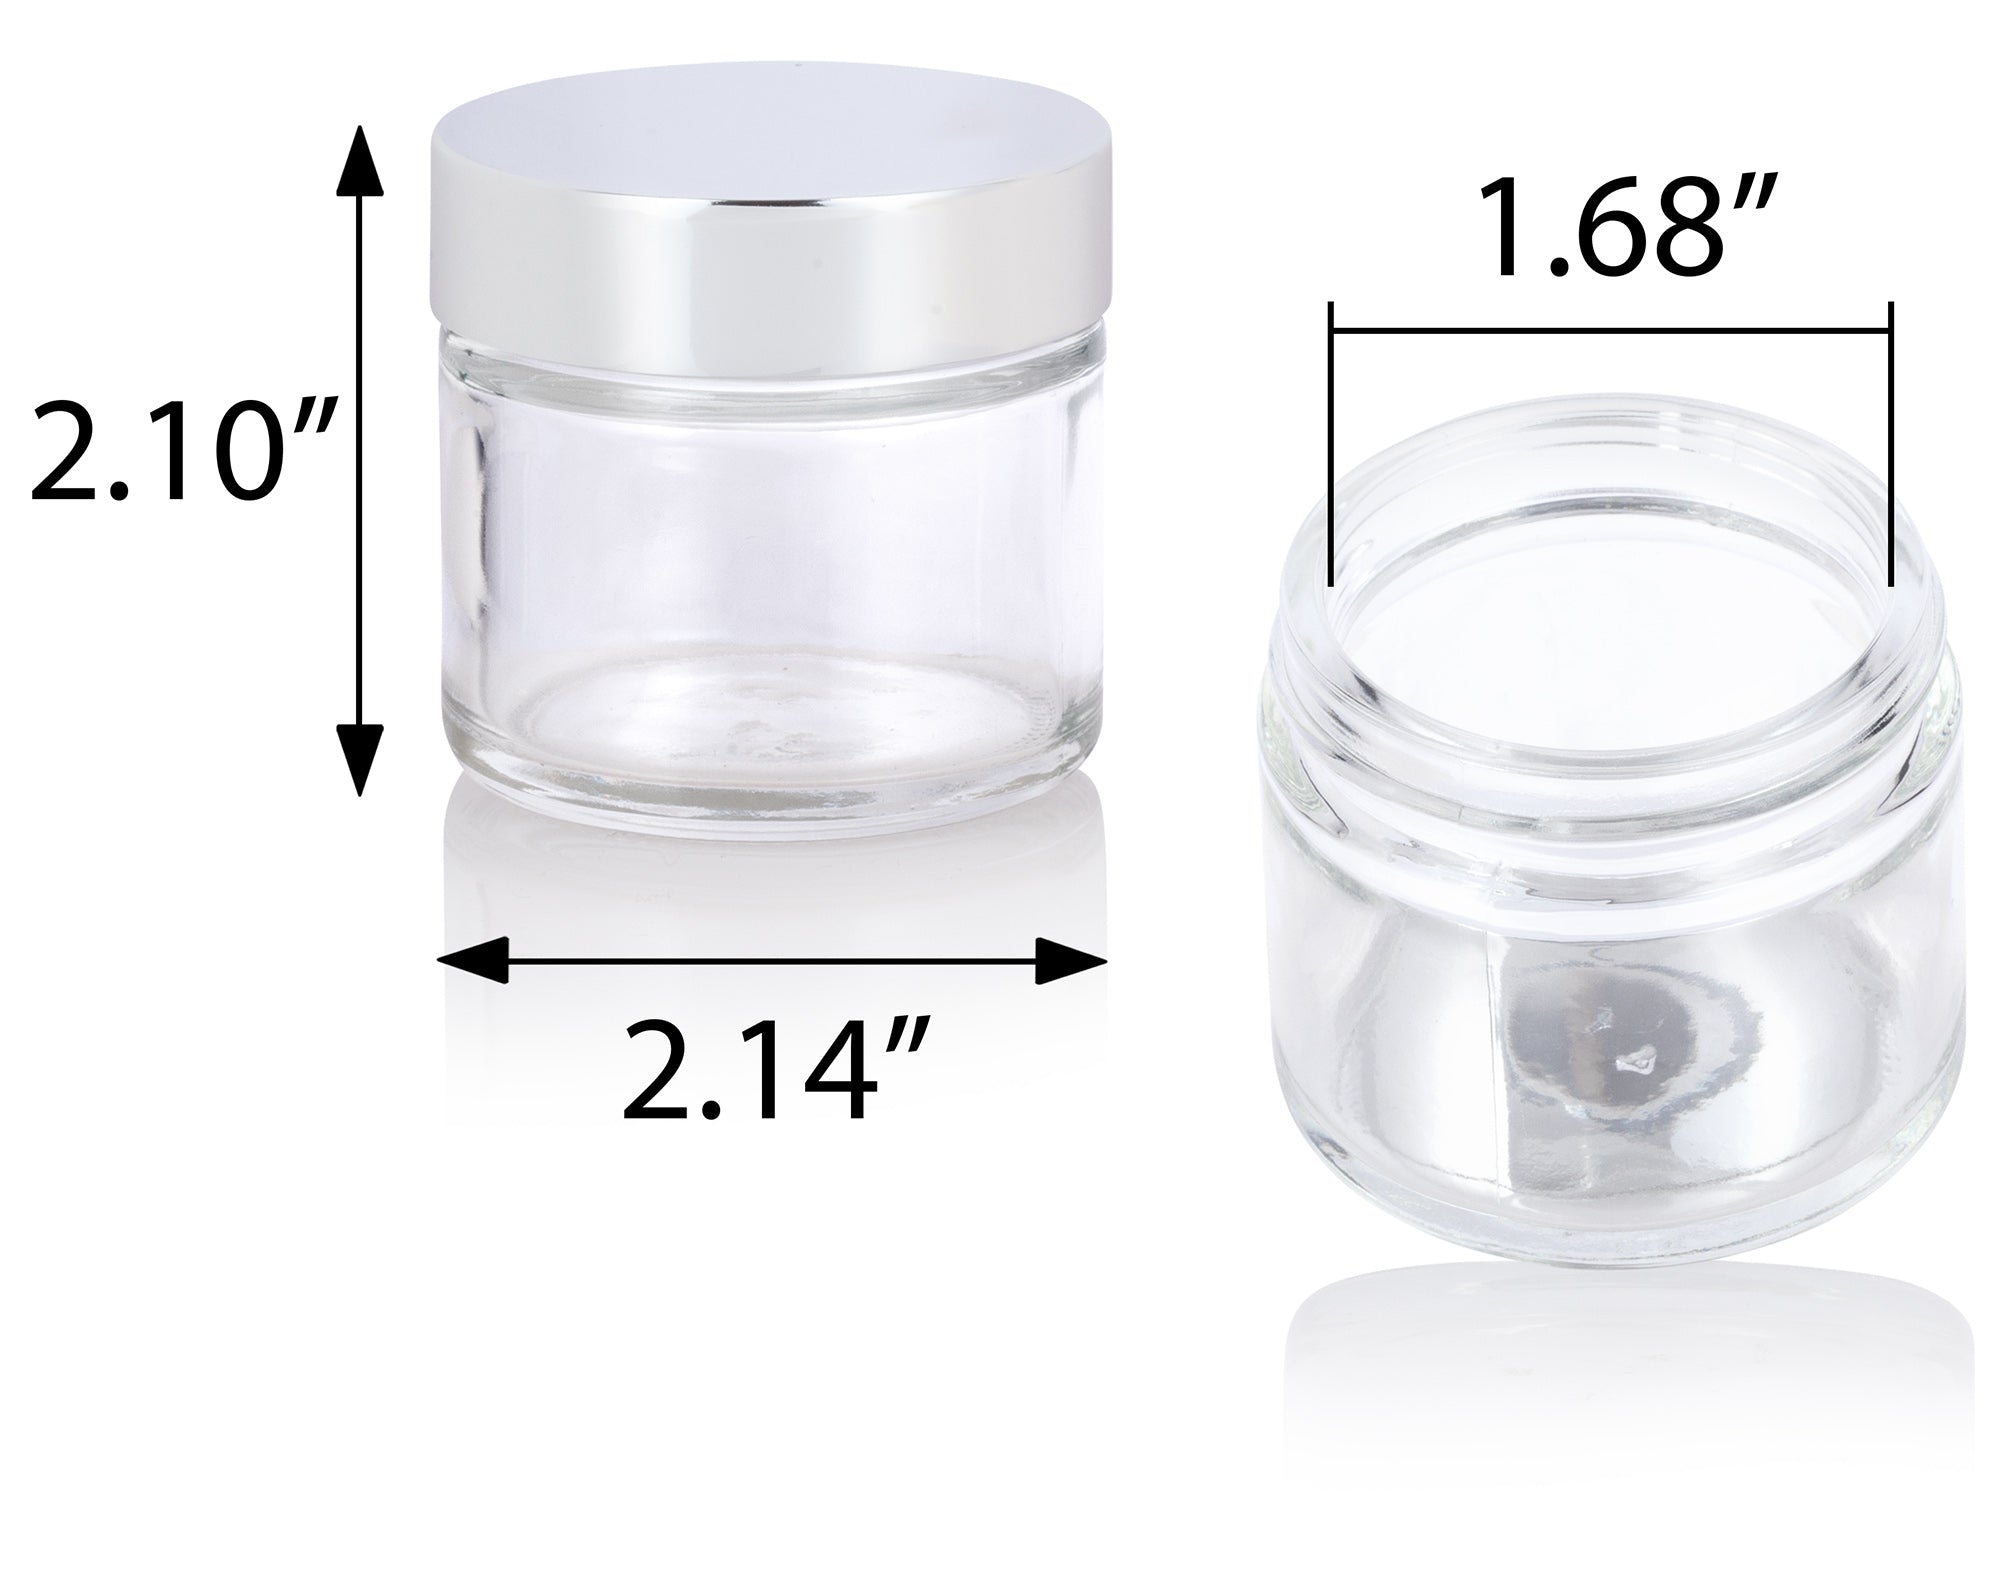 Large Clear Thick Glass Straight Sided Jar with Lid - 16 oz / 480 ml